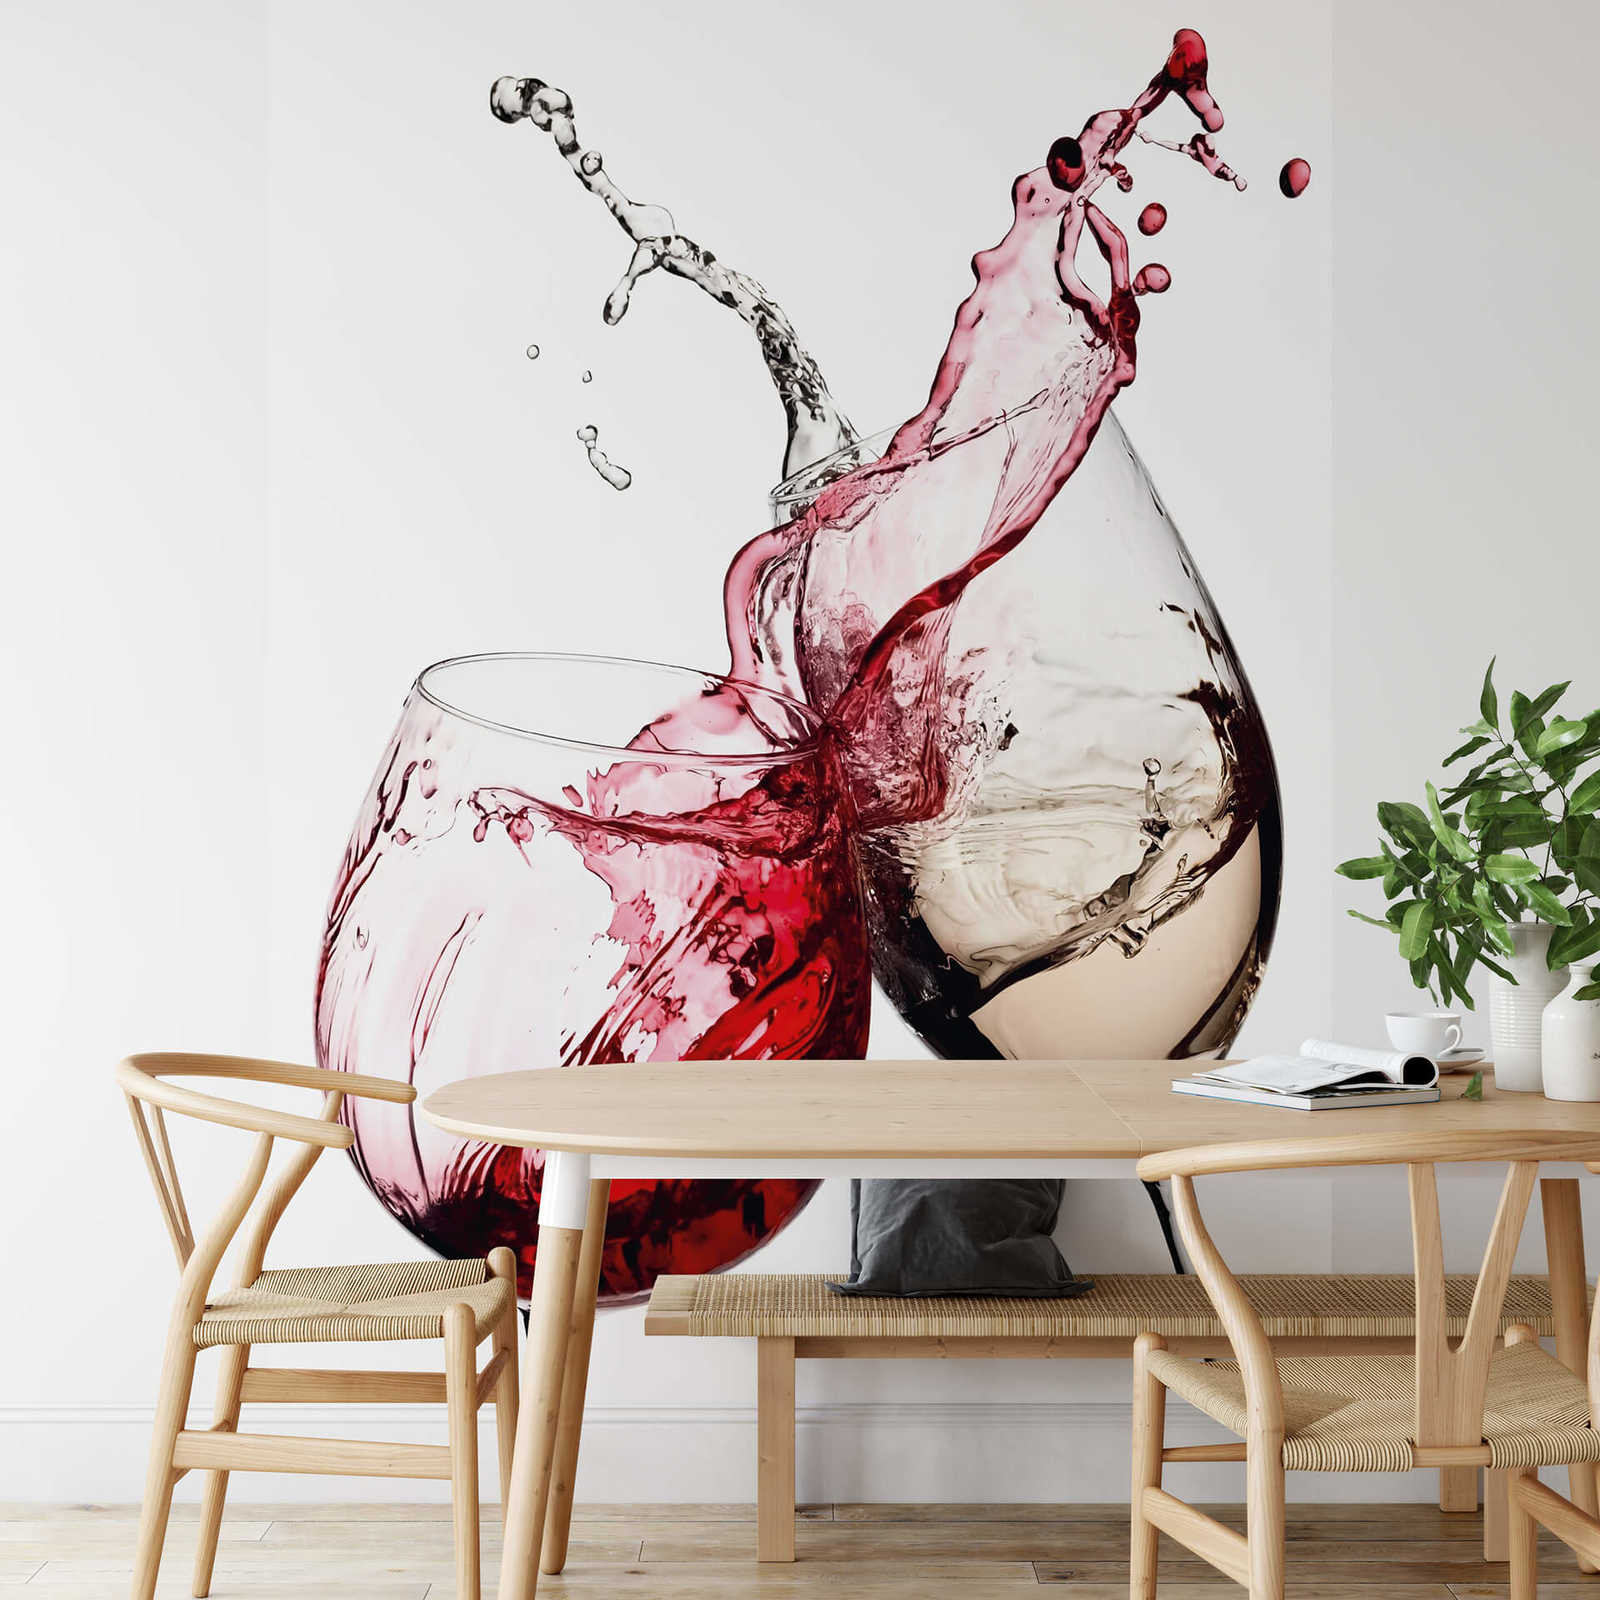             Wine mural red and white wine glasses
        